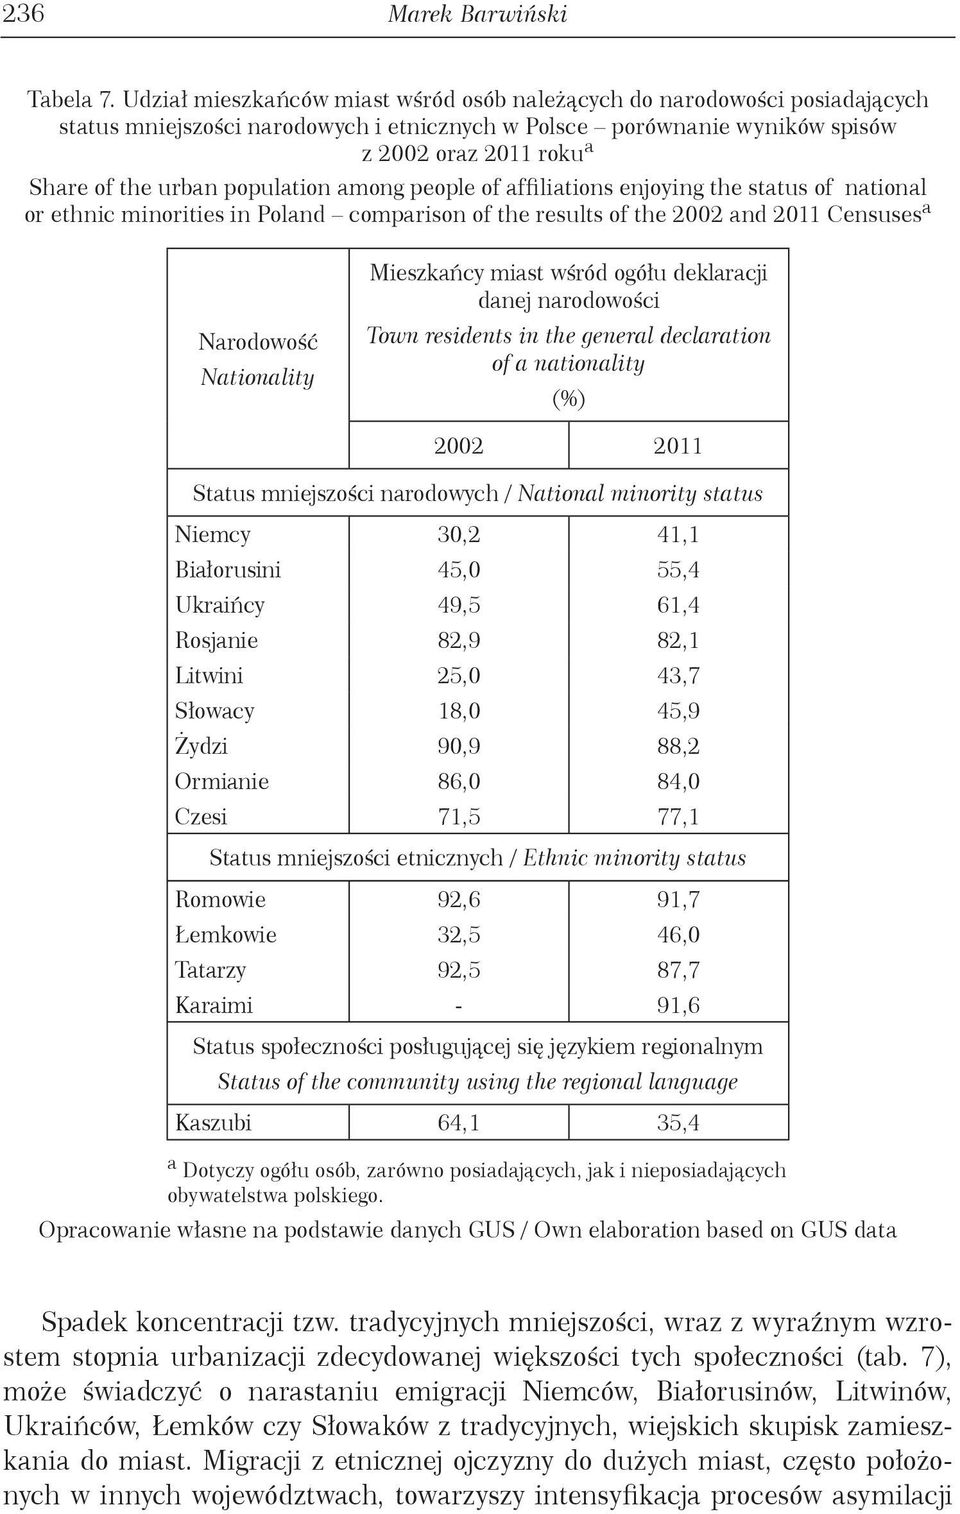 population among people of affiliations enjoying the status of national or ethnic minorities in Poland comparison of the results of the 2002 and 2011 Censuses a Narodowość Nationality Mieszkańcy